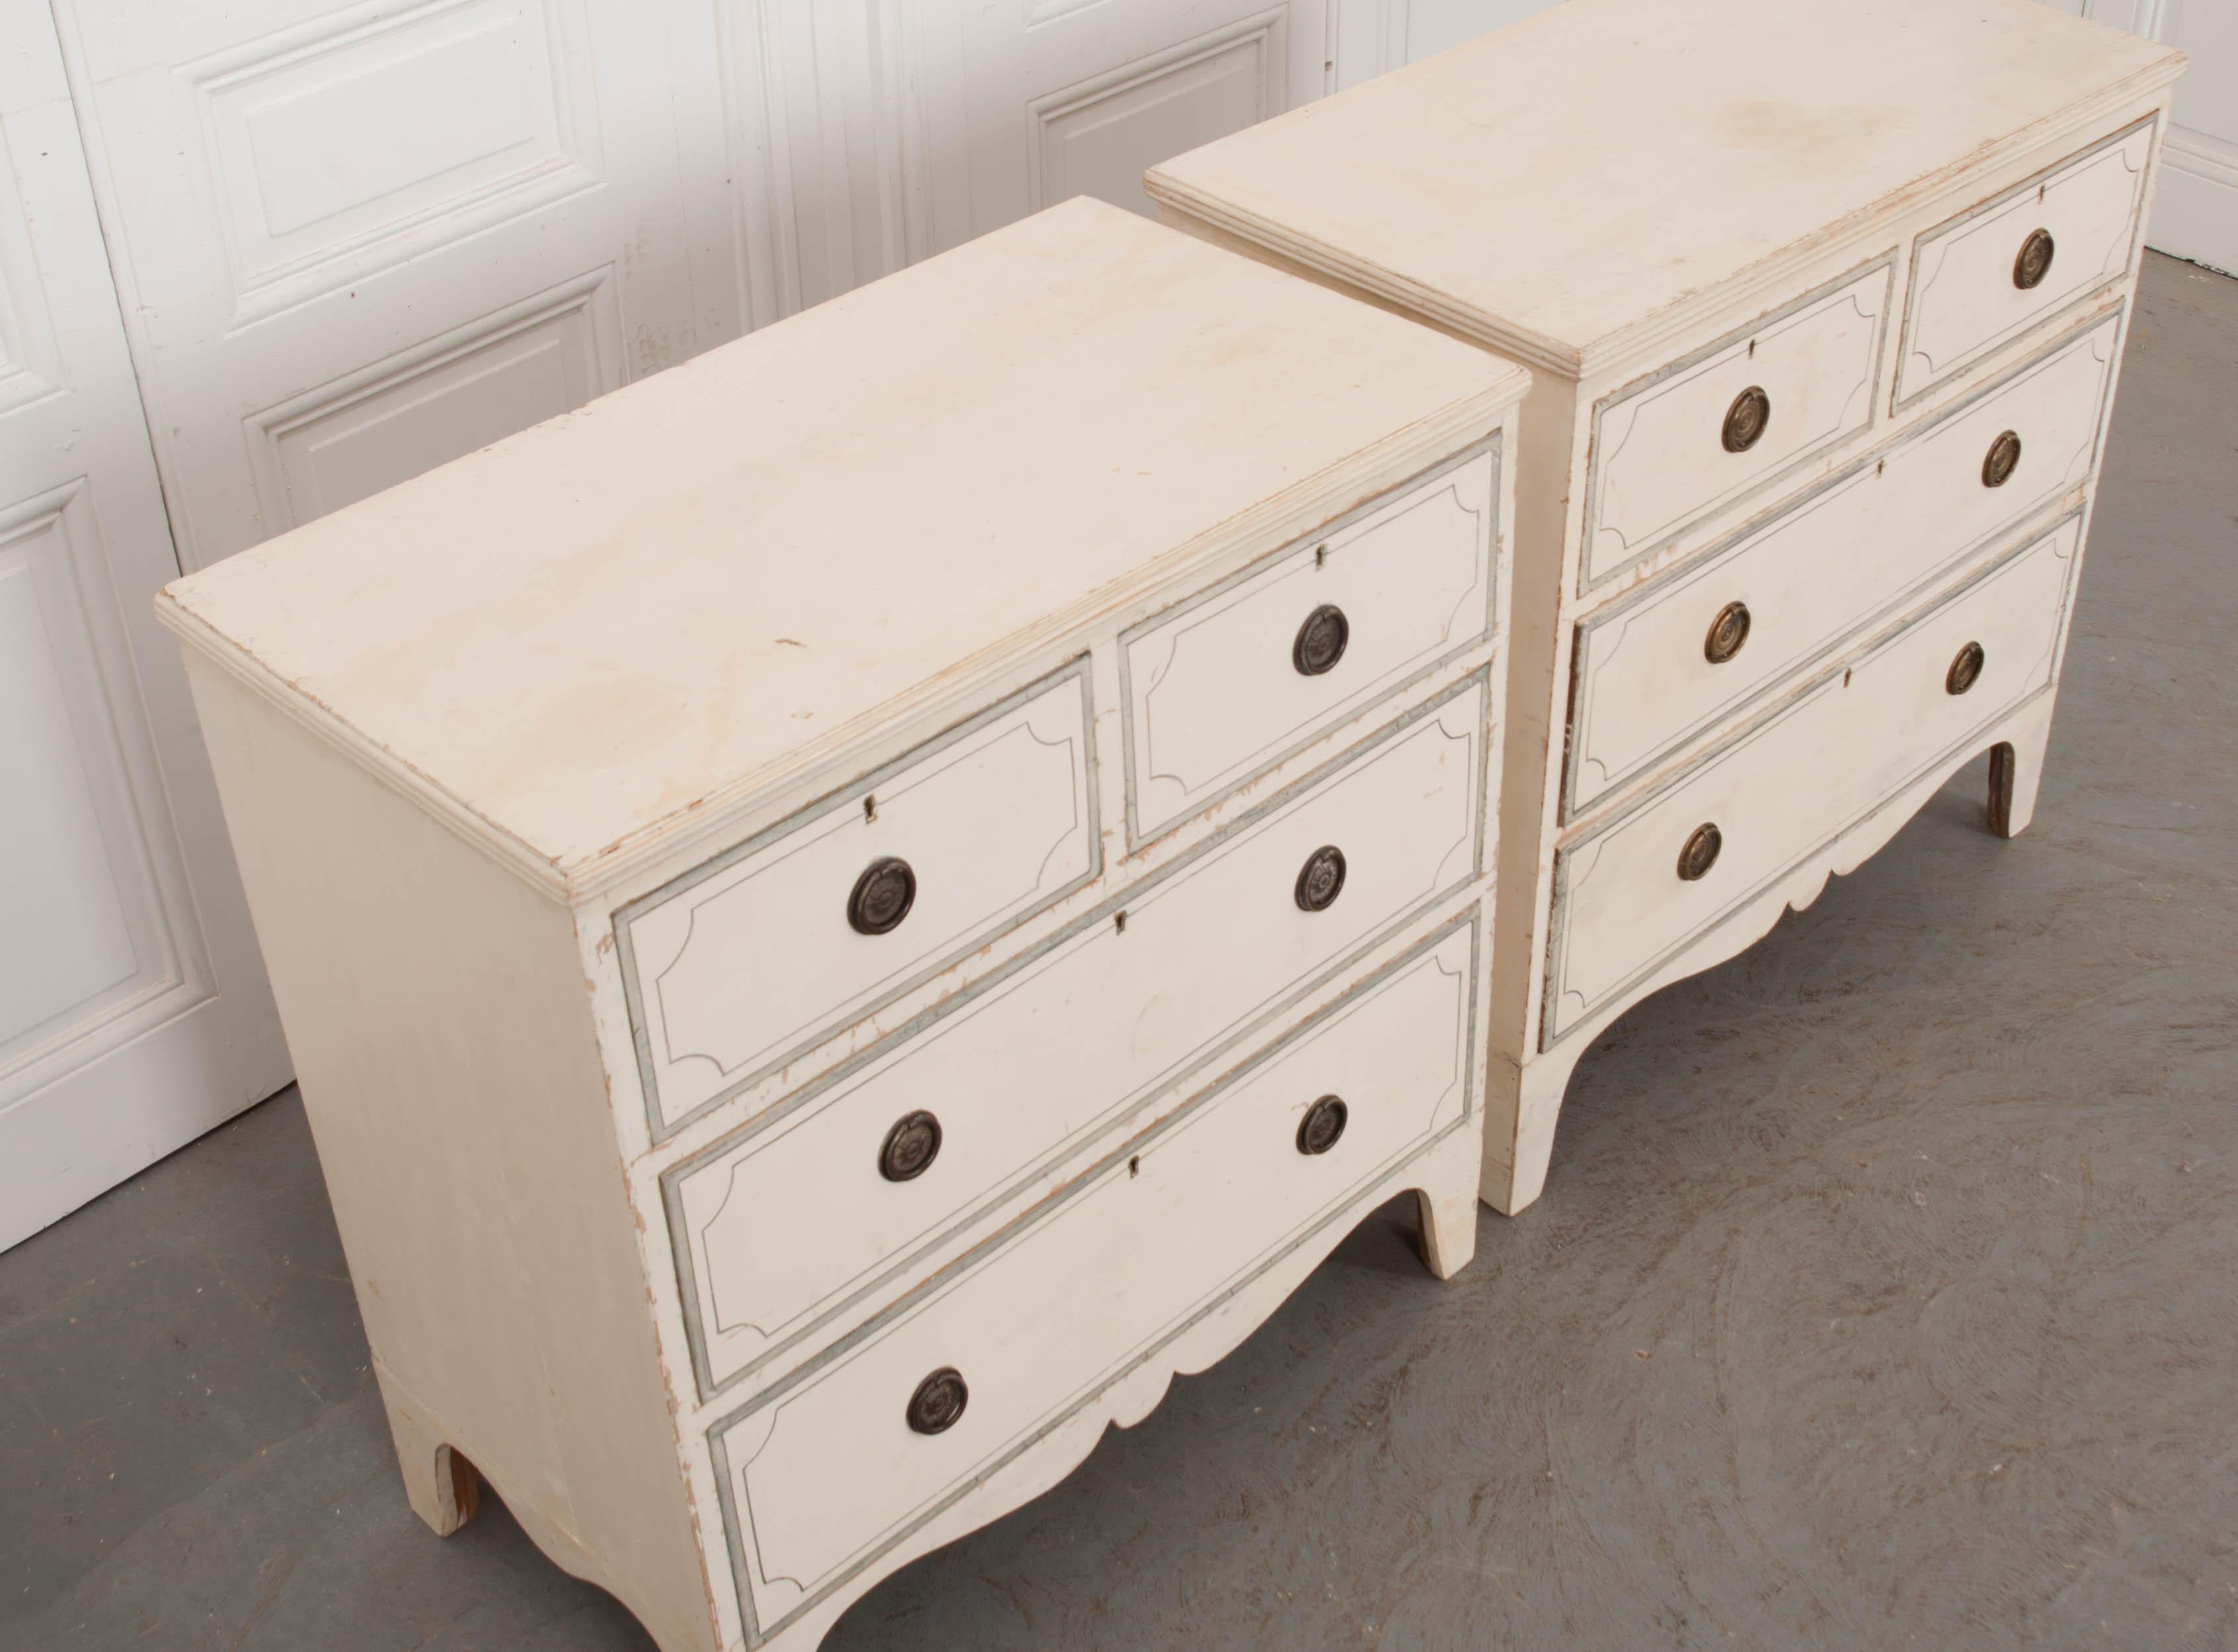 A delightful pair of Edwardian cream-painted chests of drawers, from turn of the 20th century England. Each features two short drawers over two long drawers with hand painted blue-grey accents and round patinated brass pulls. Diminutive in size,